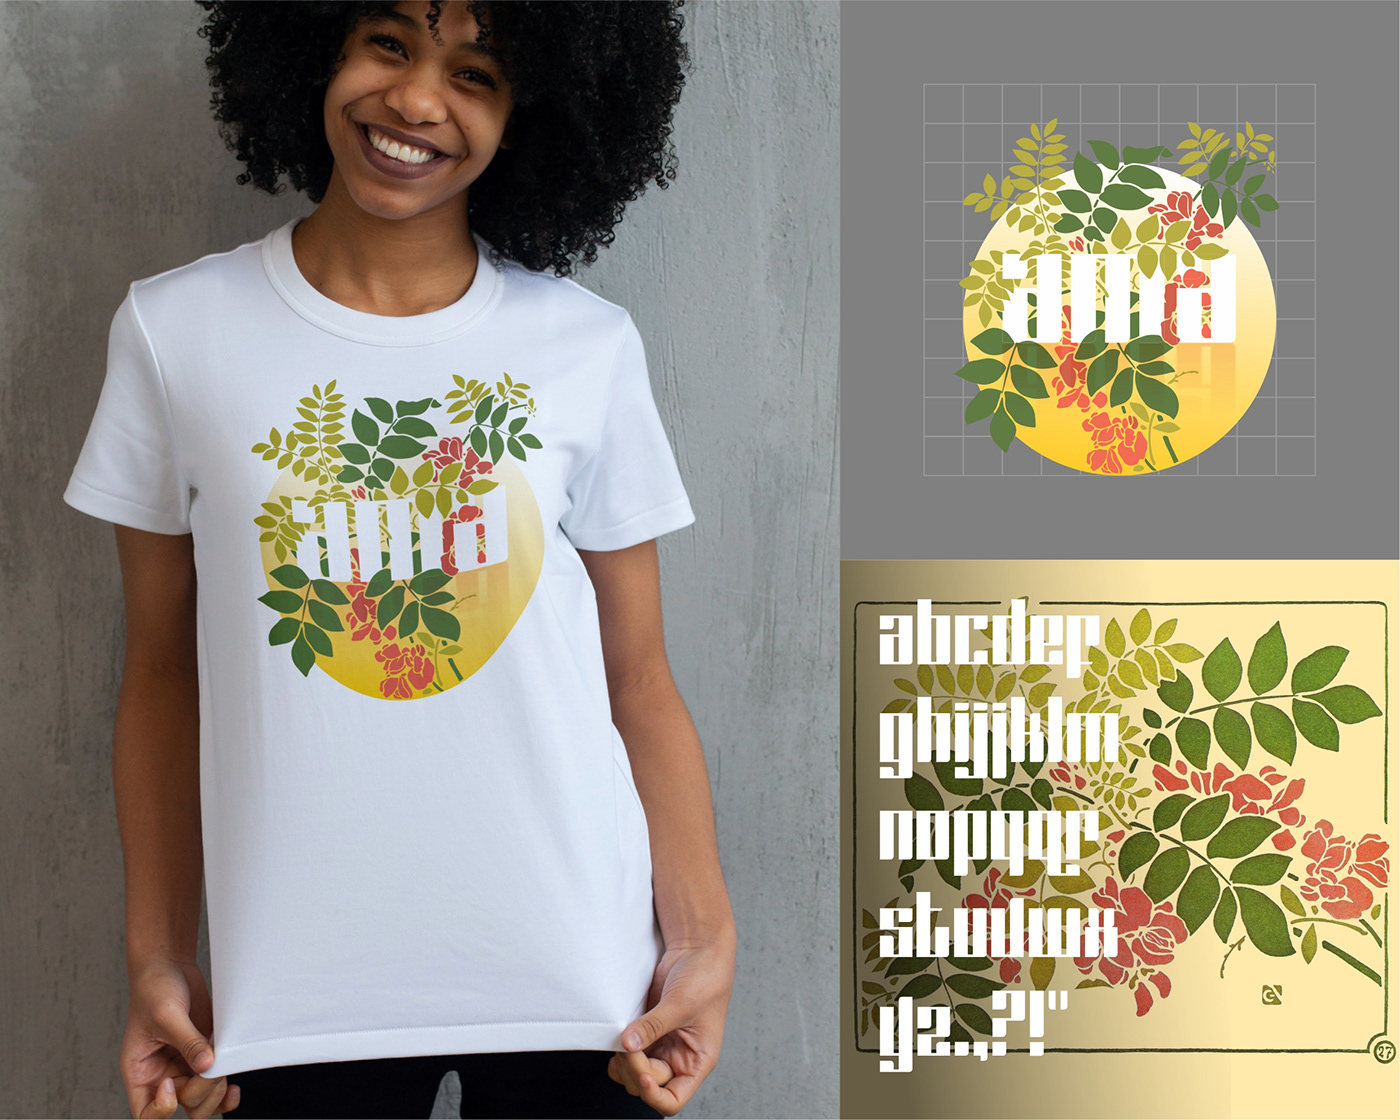 Woman wearing colourful illustrated tee with leaves and blossoms. Inset images of the tee design 